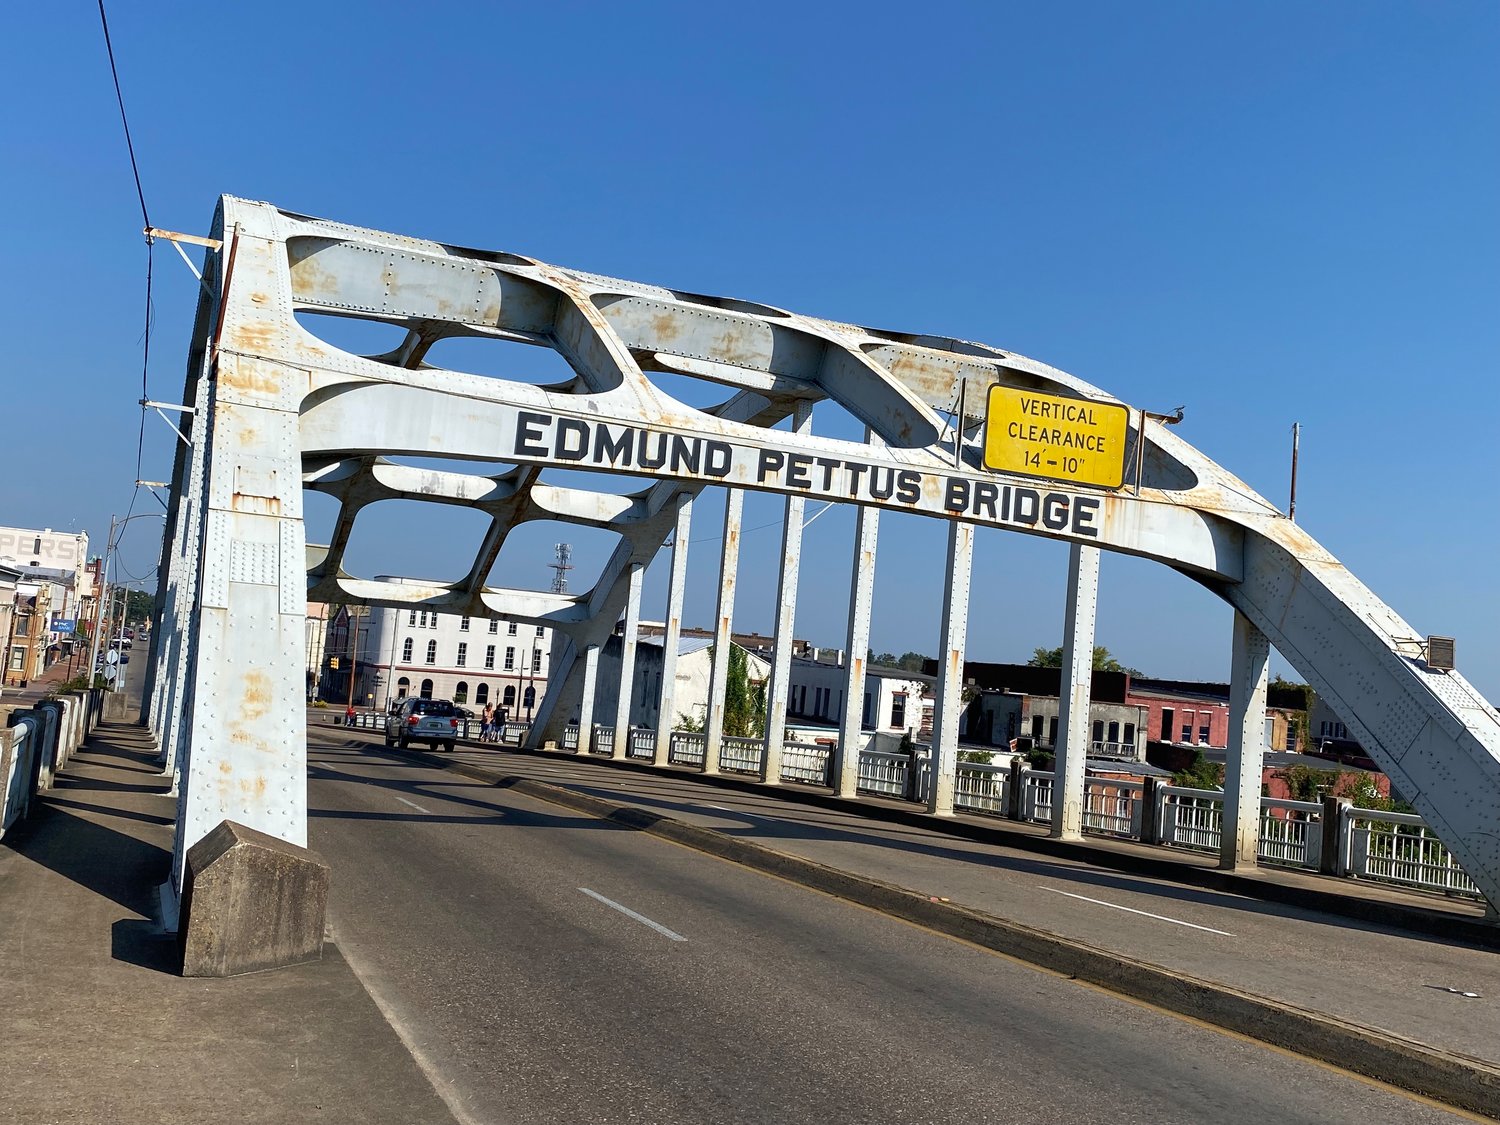 A view from the west side of the Edmund Pettus Bridge in Selma, Alabama, not far from the location where marchers were beaten by state troopers and local law enforcement officers on 'Bloody Sunday' — March 7, 1965.